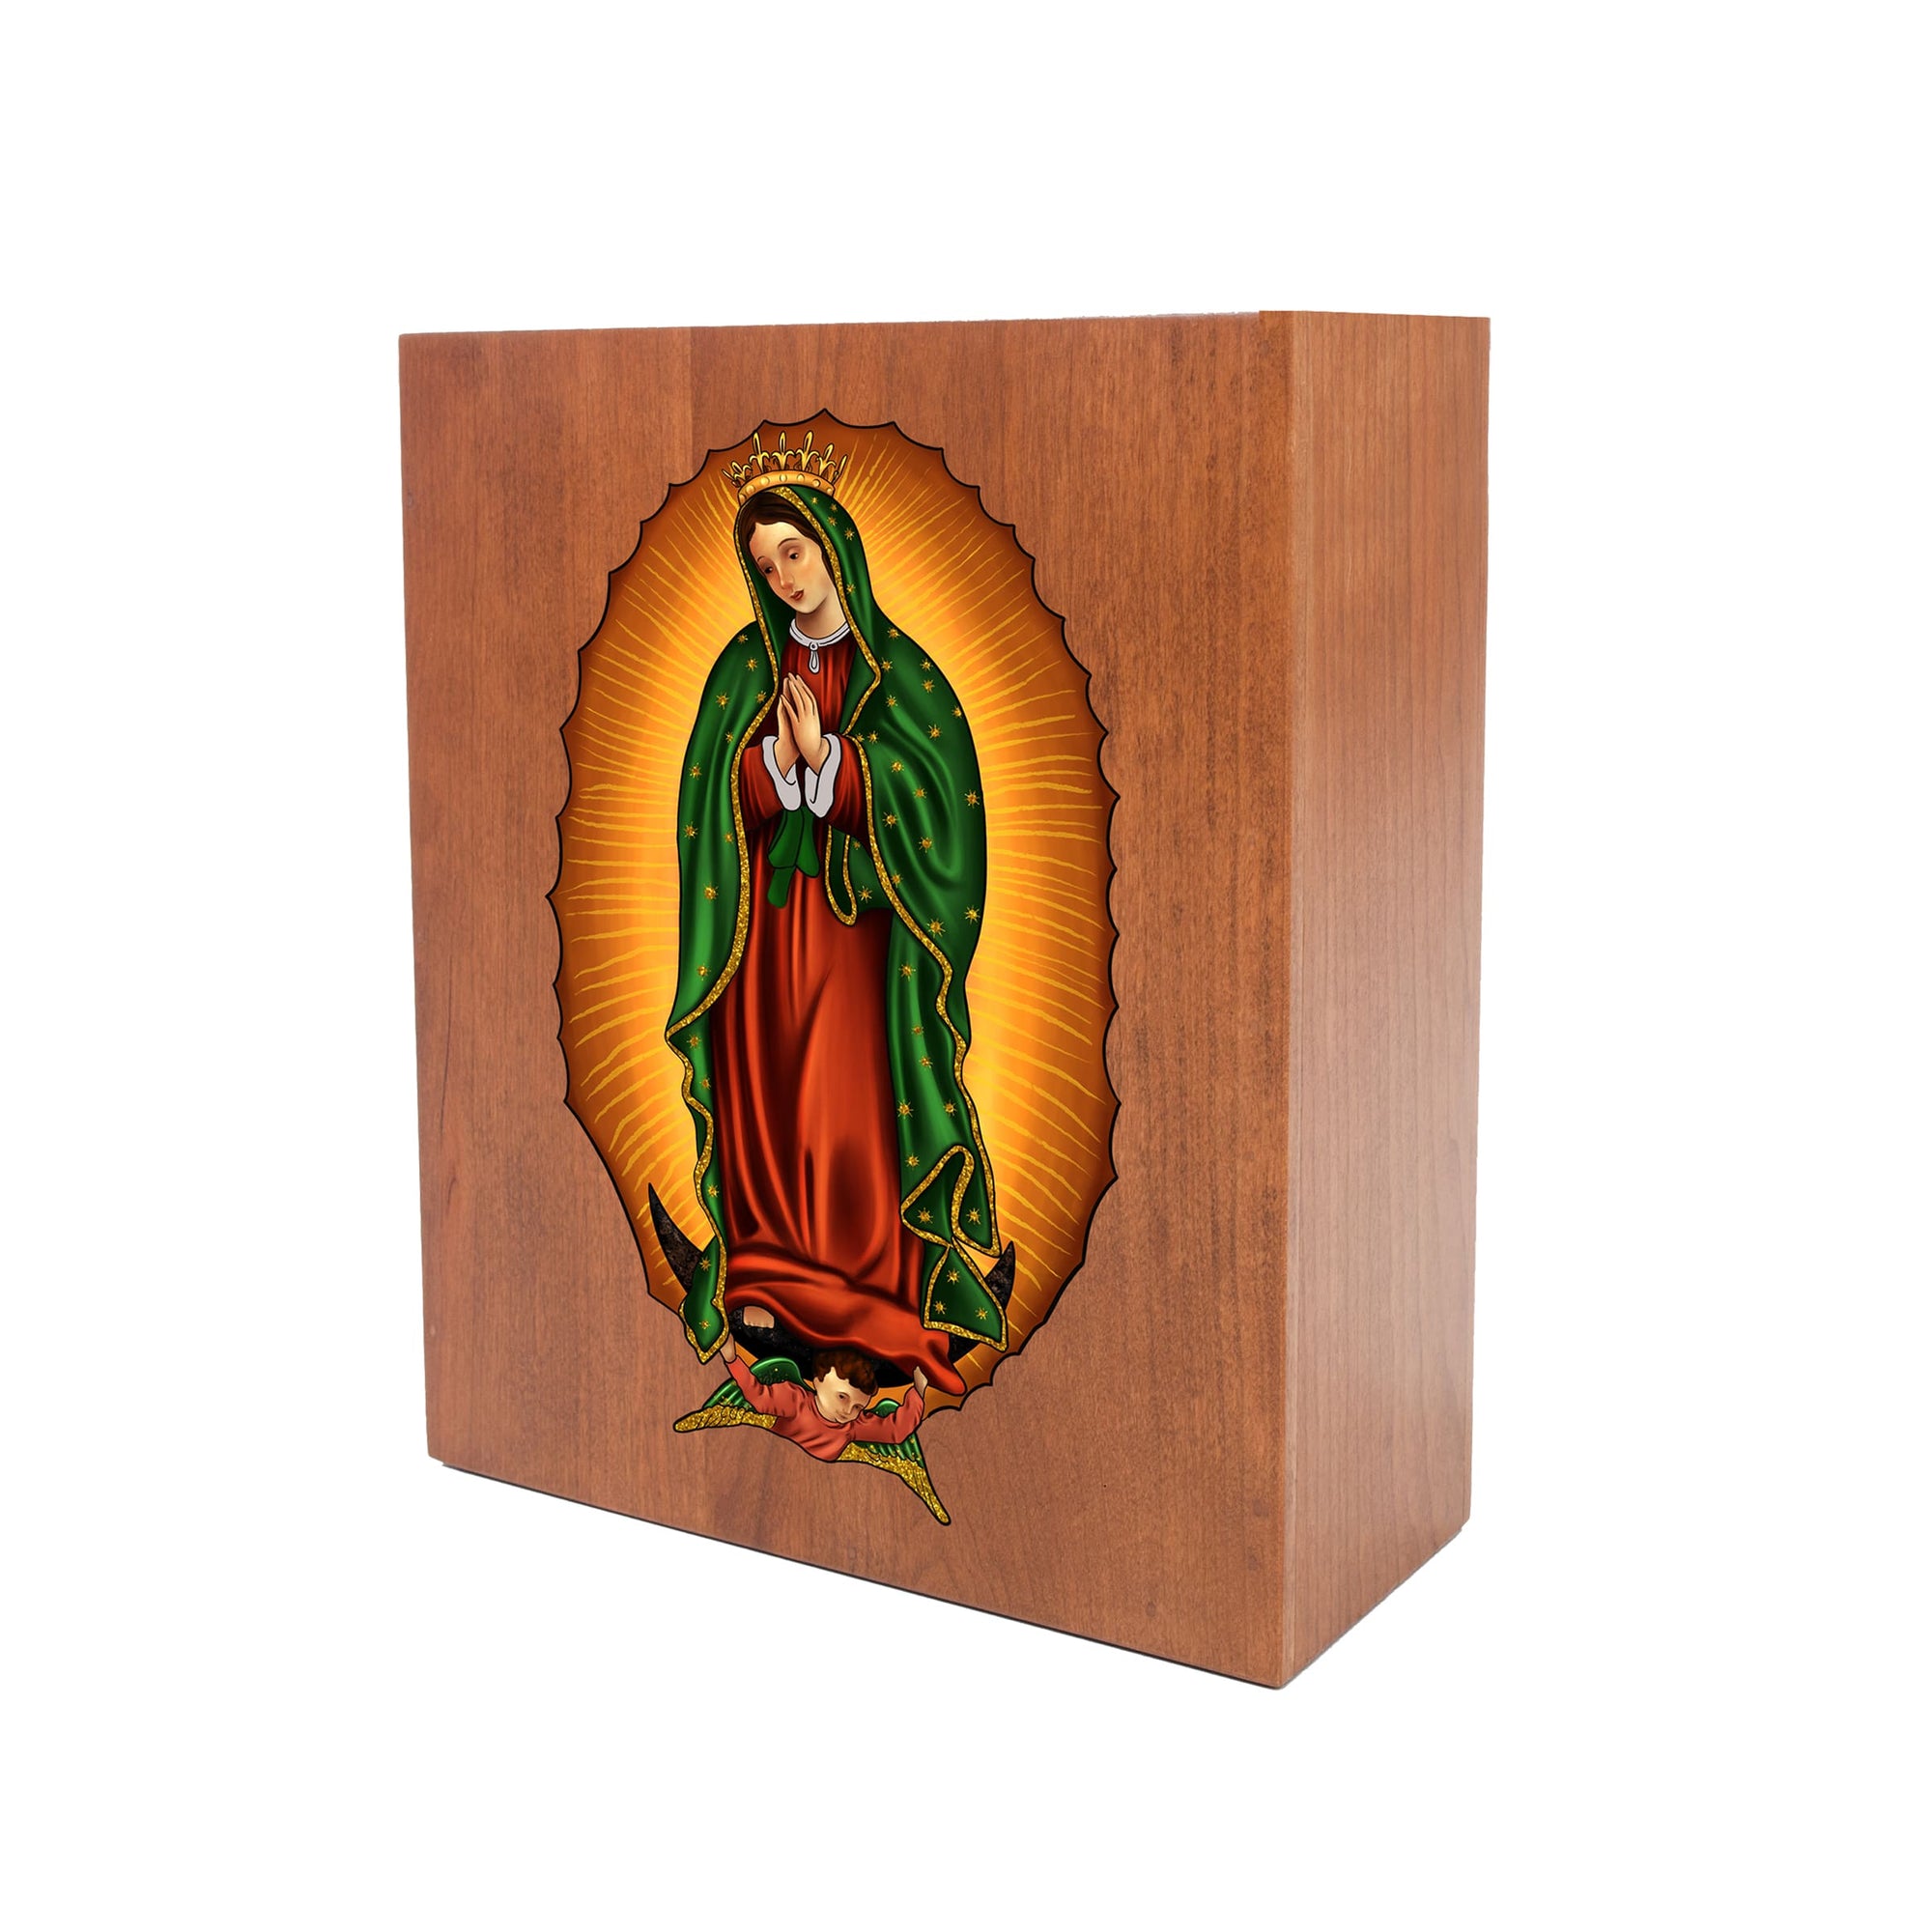 Virgin Lady of Guadalupe Memorial Cremation Scattering Urn For Adult Human Ashes In Spanish - Lady of Guadalupe